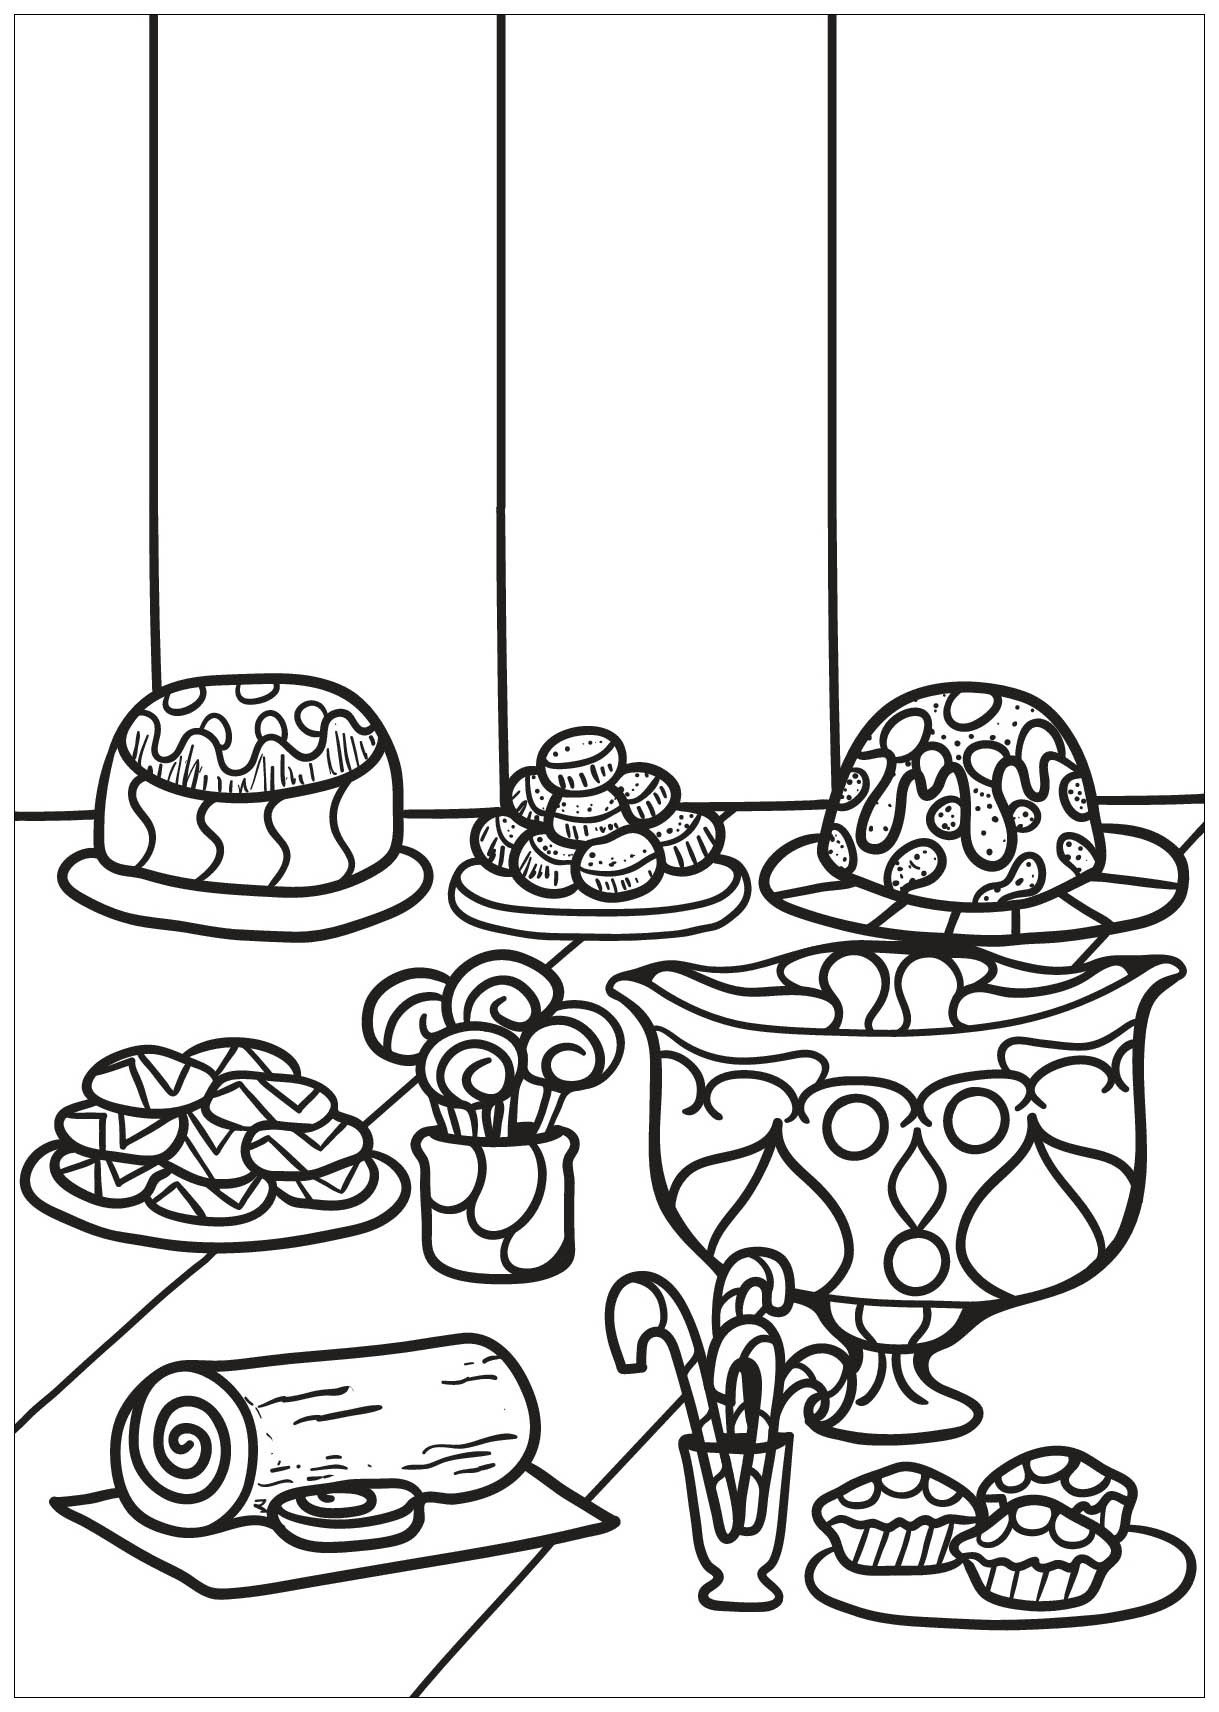 Free book cupcake 1 - Cupcakes Adult Coloring Pages